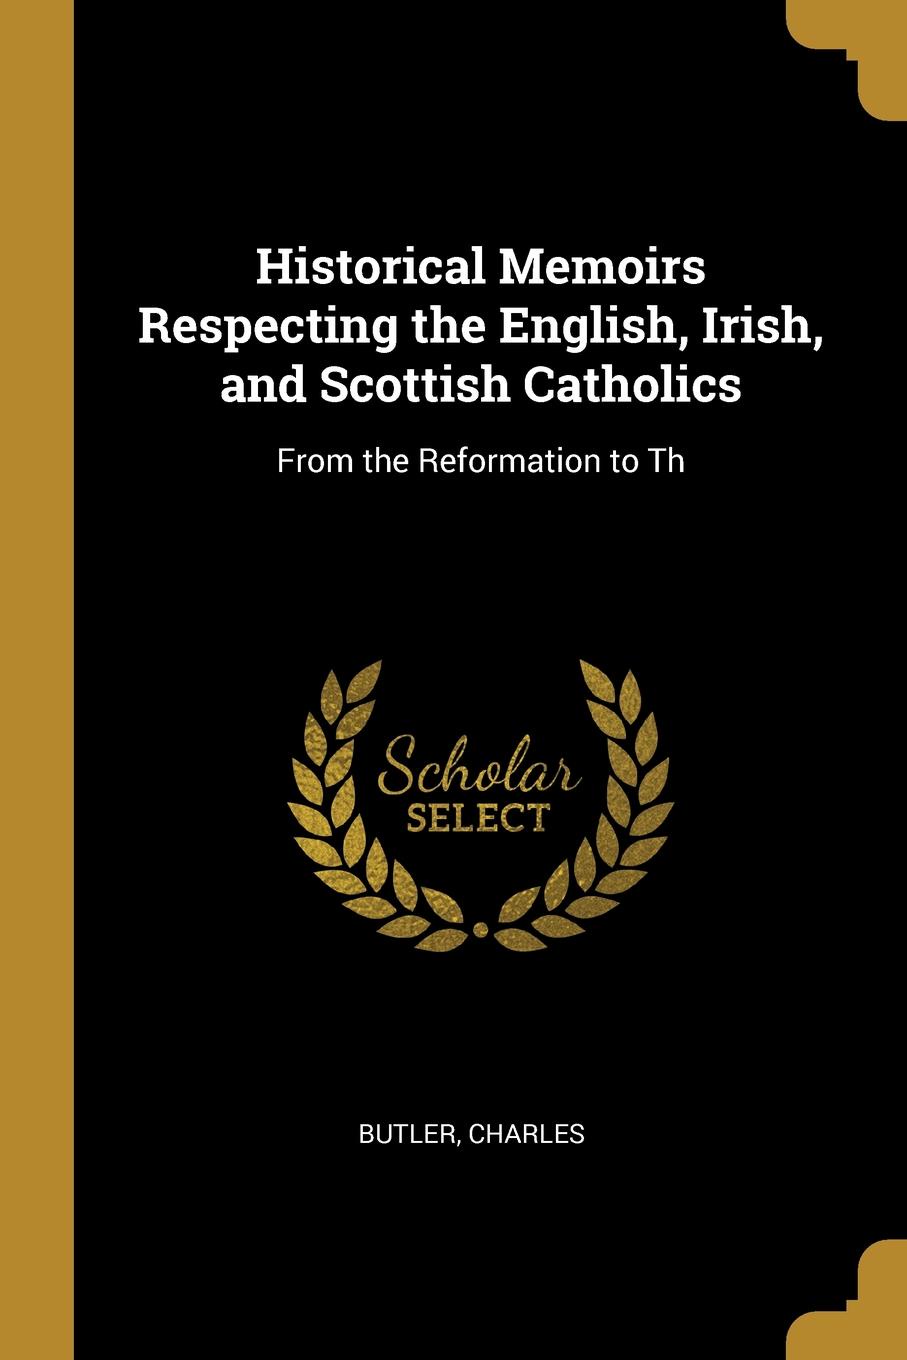 Historical Memoirs Respecting the English, Irish, and Scottish Catholics. From the Reformation to Th